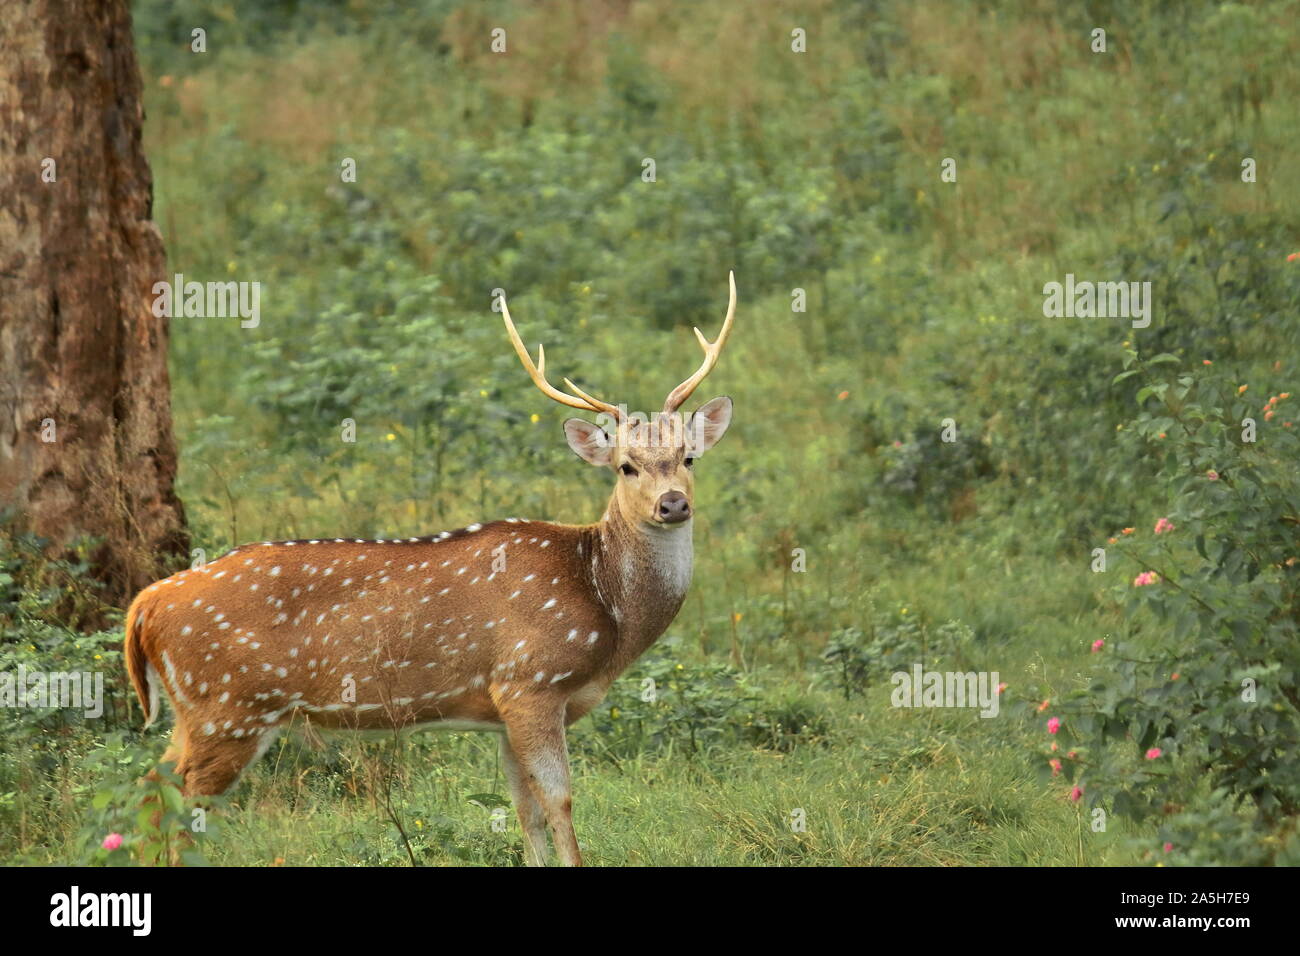 Chital or Cheetal (Axis axis) or Spotted deer in Bandipur National Park, Karnataka in India. This National Park is a part of Nilgiri biosphere reserve Stock Photo